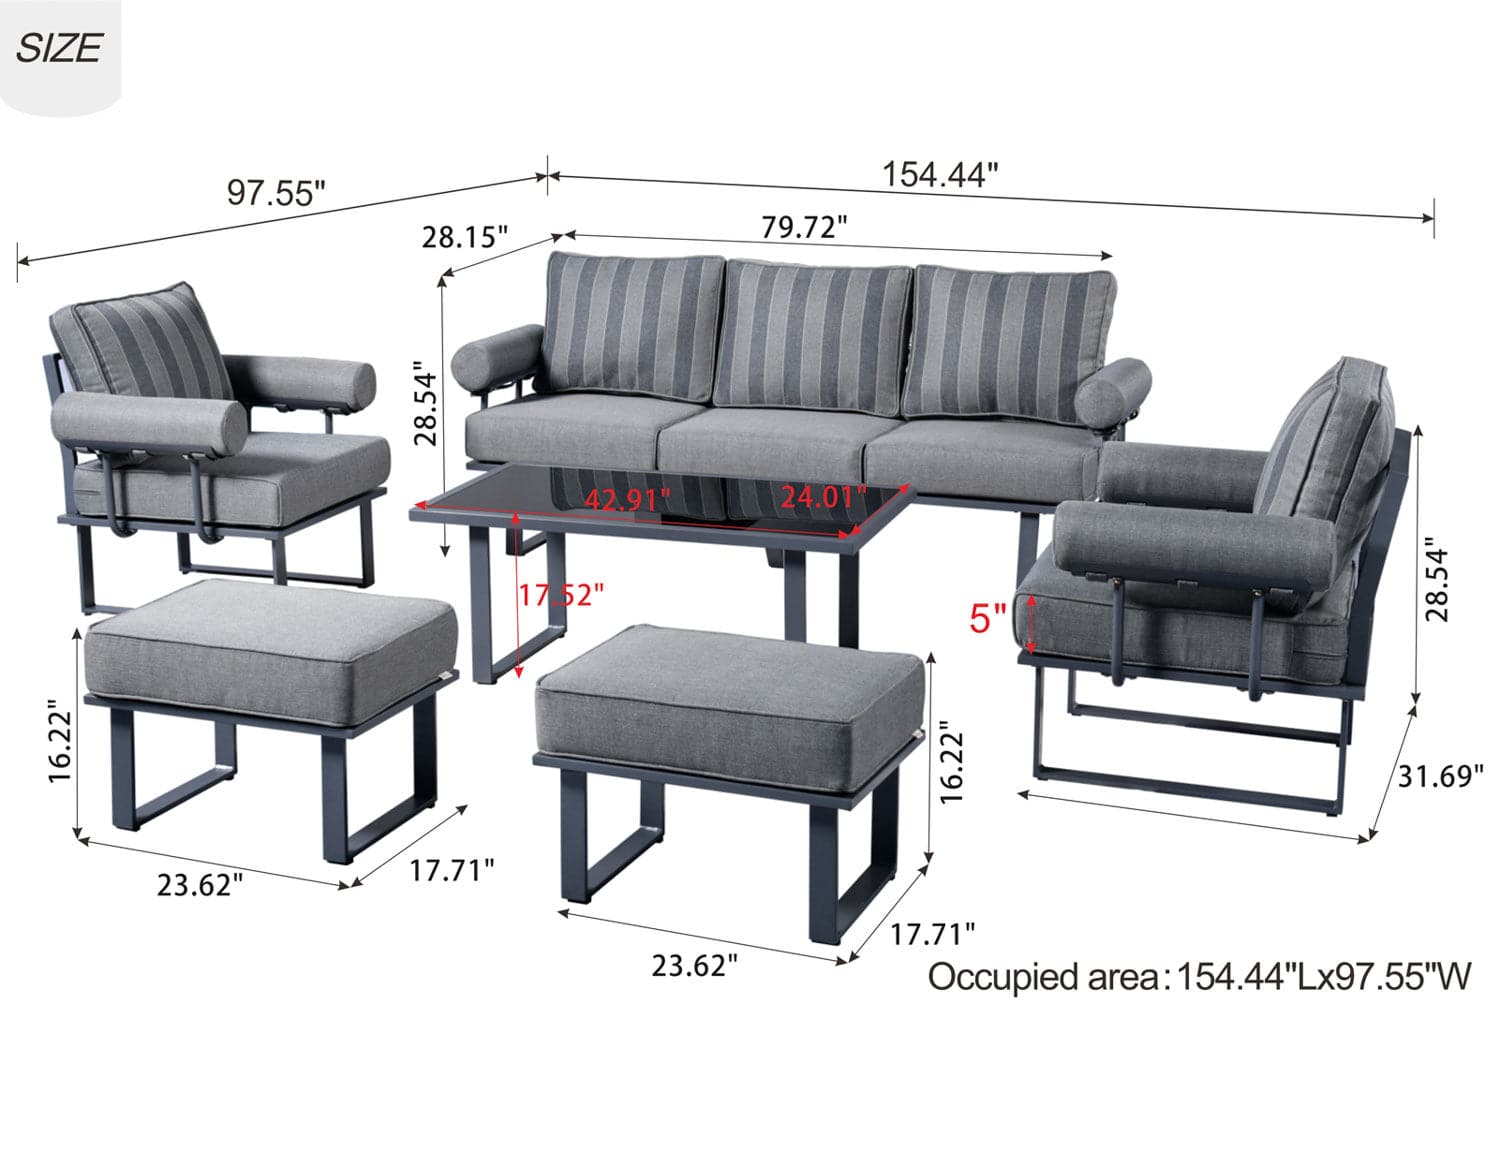 Ovios Aluminum Patio Furniture Set 6-Piece with Table and Ottoman